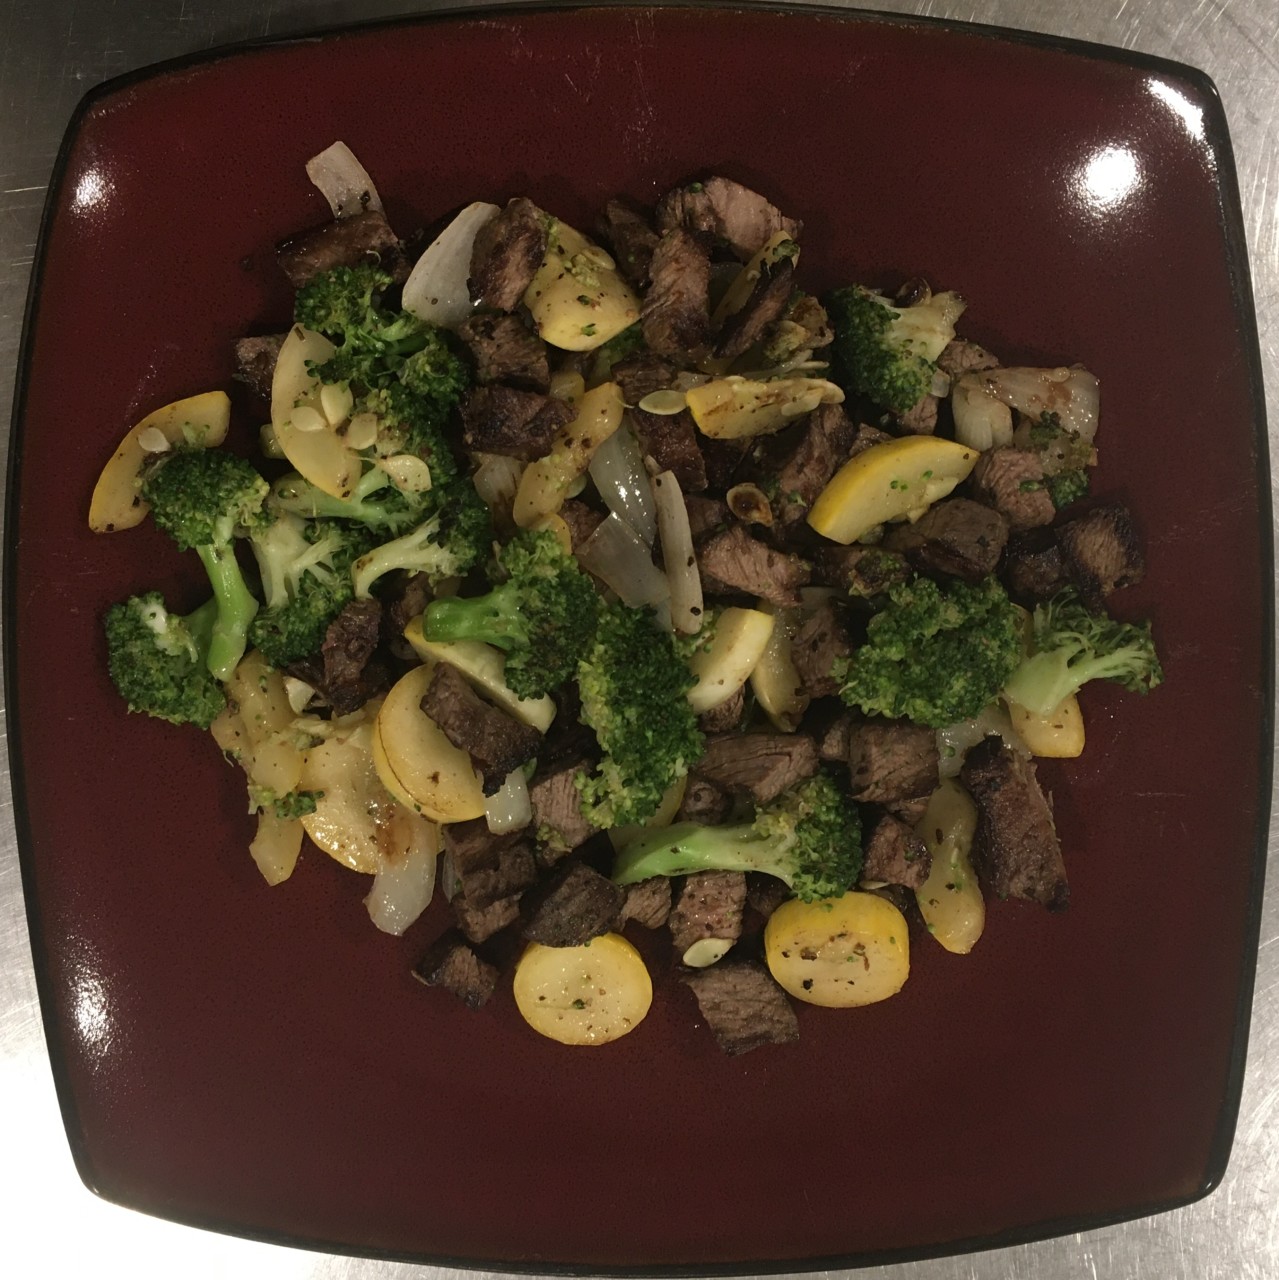 <a class="bx-tag" rel="tag" href="https://streetloc.com/view-channel-profile/whatsfordinner"><s>#</s><b>whatsfordinner</b></a> Grilled Steak served with Sautéed Onion, Yellow Squash, and Broccoli